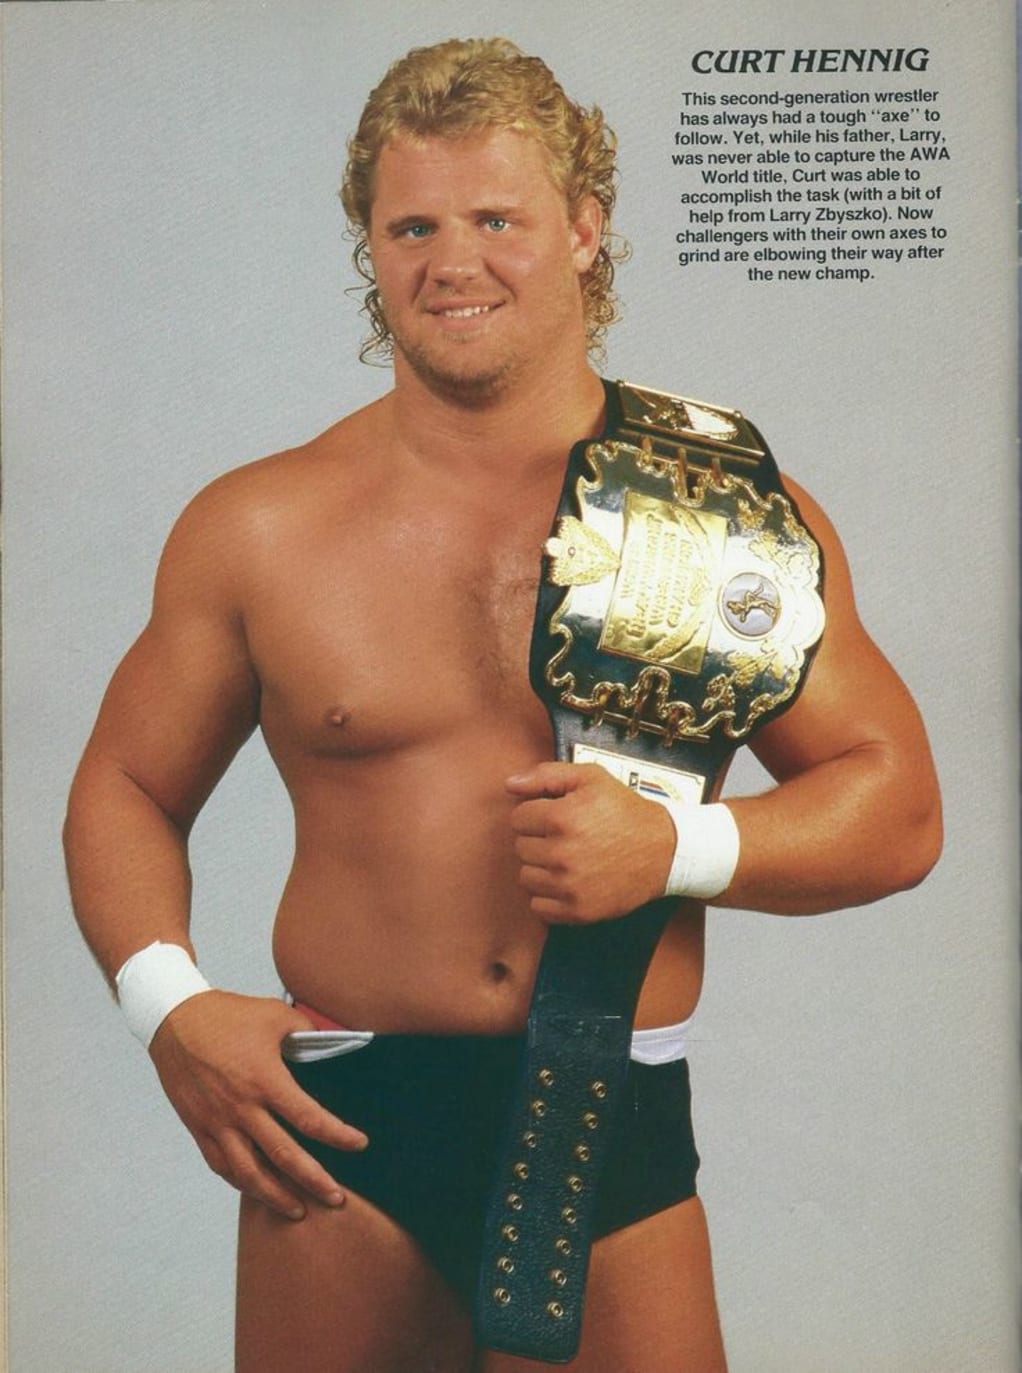 Happy Birthday to \"Mr. Perfect\" Curt Hennig! Curt would be 65 today if he was still with us. 